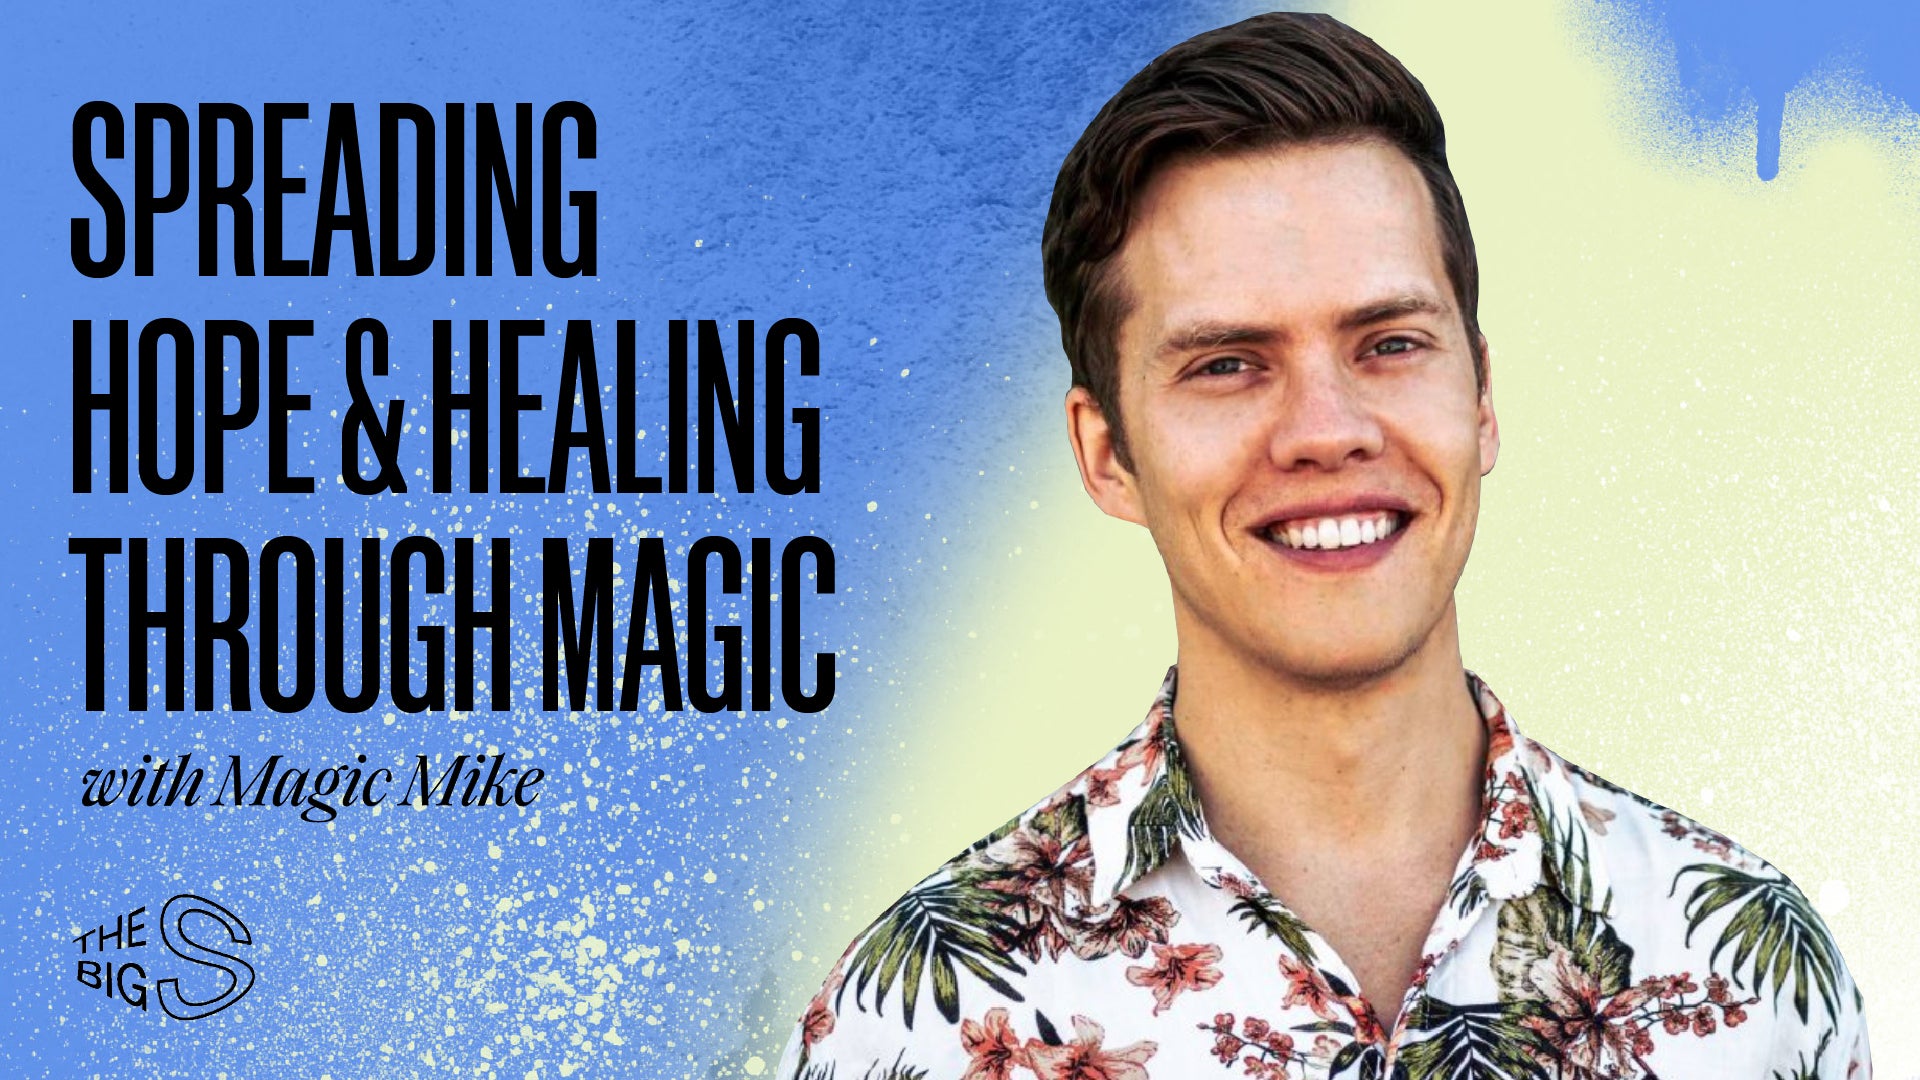 52. Magic Mike: Spreading Smiles & A Magical Mental Health Message